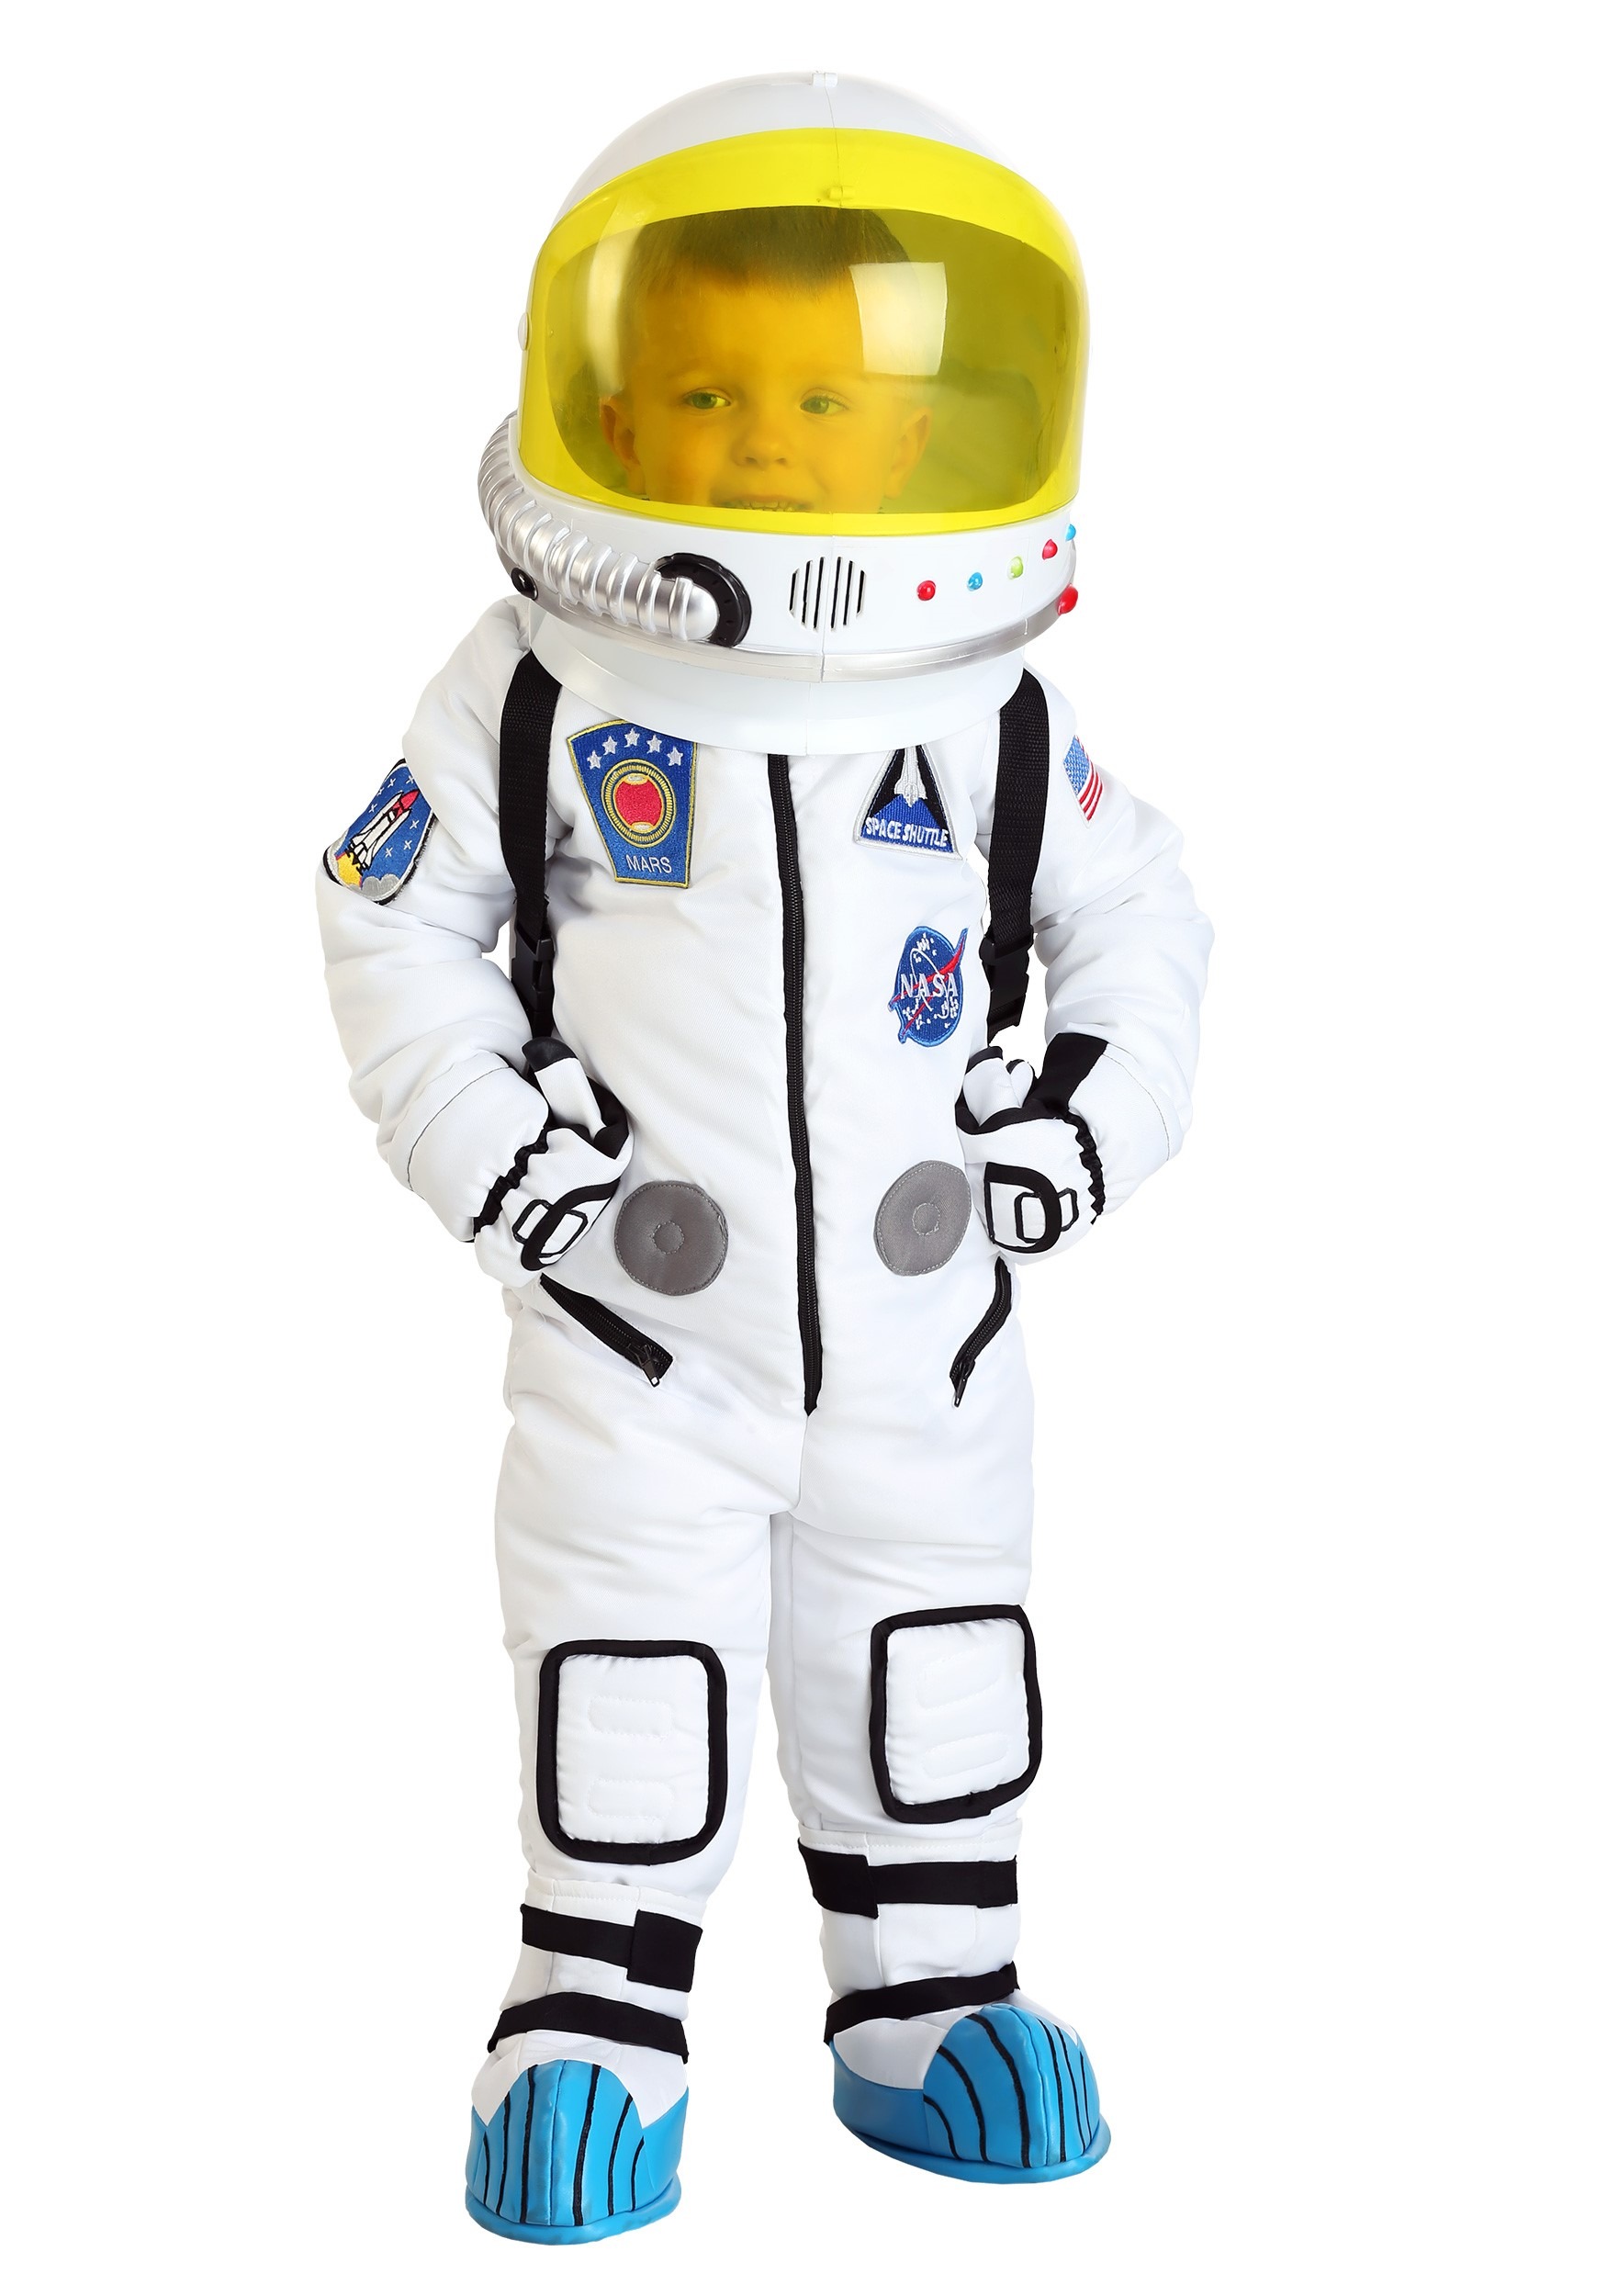 Deluxe Astronaut Costume for a Toddler